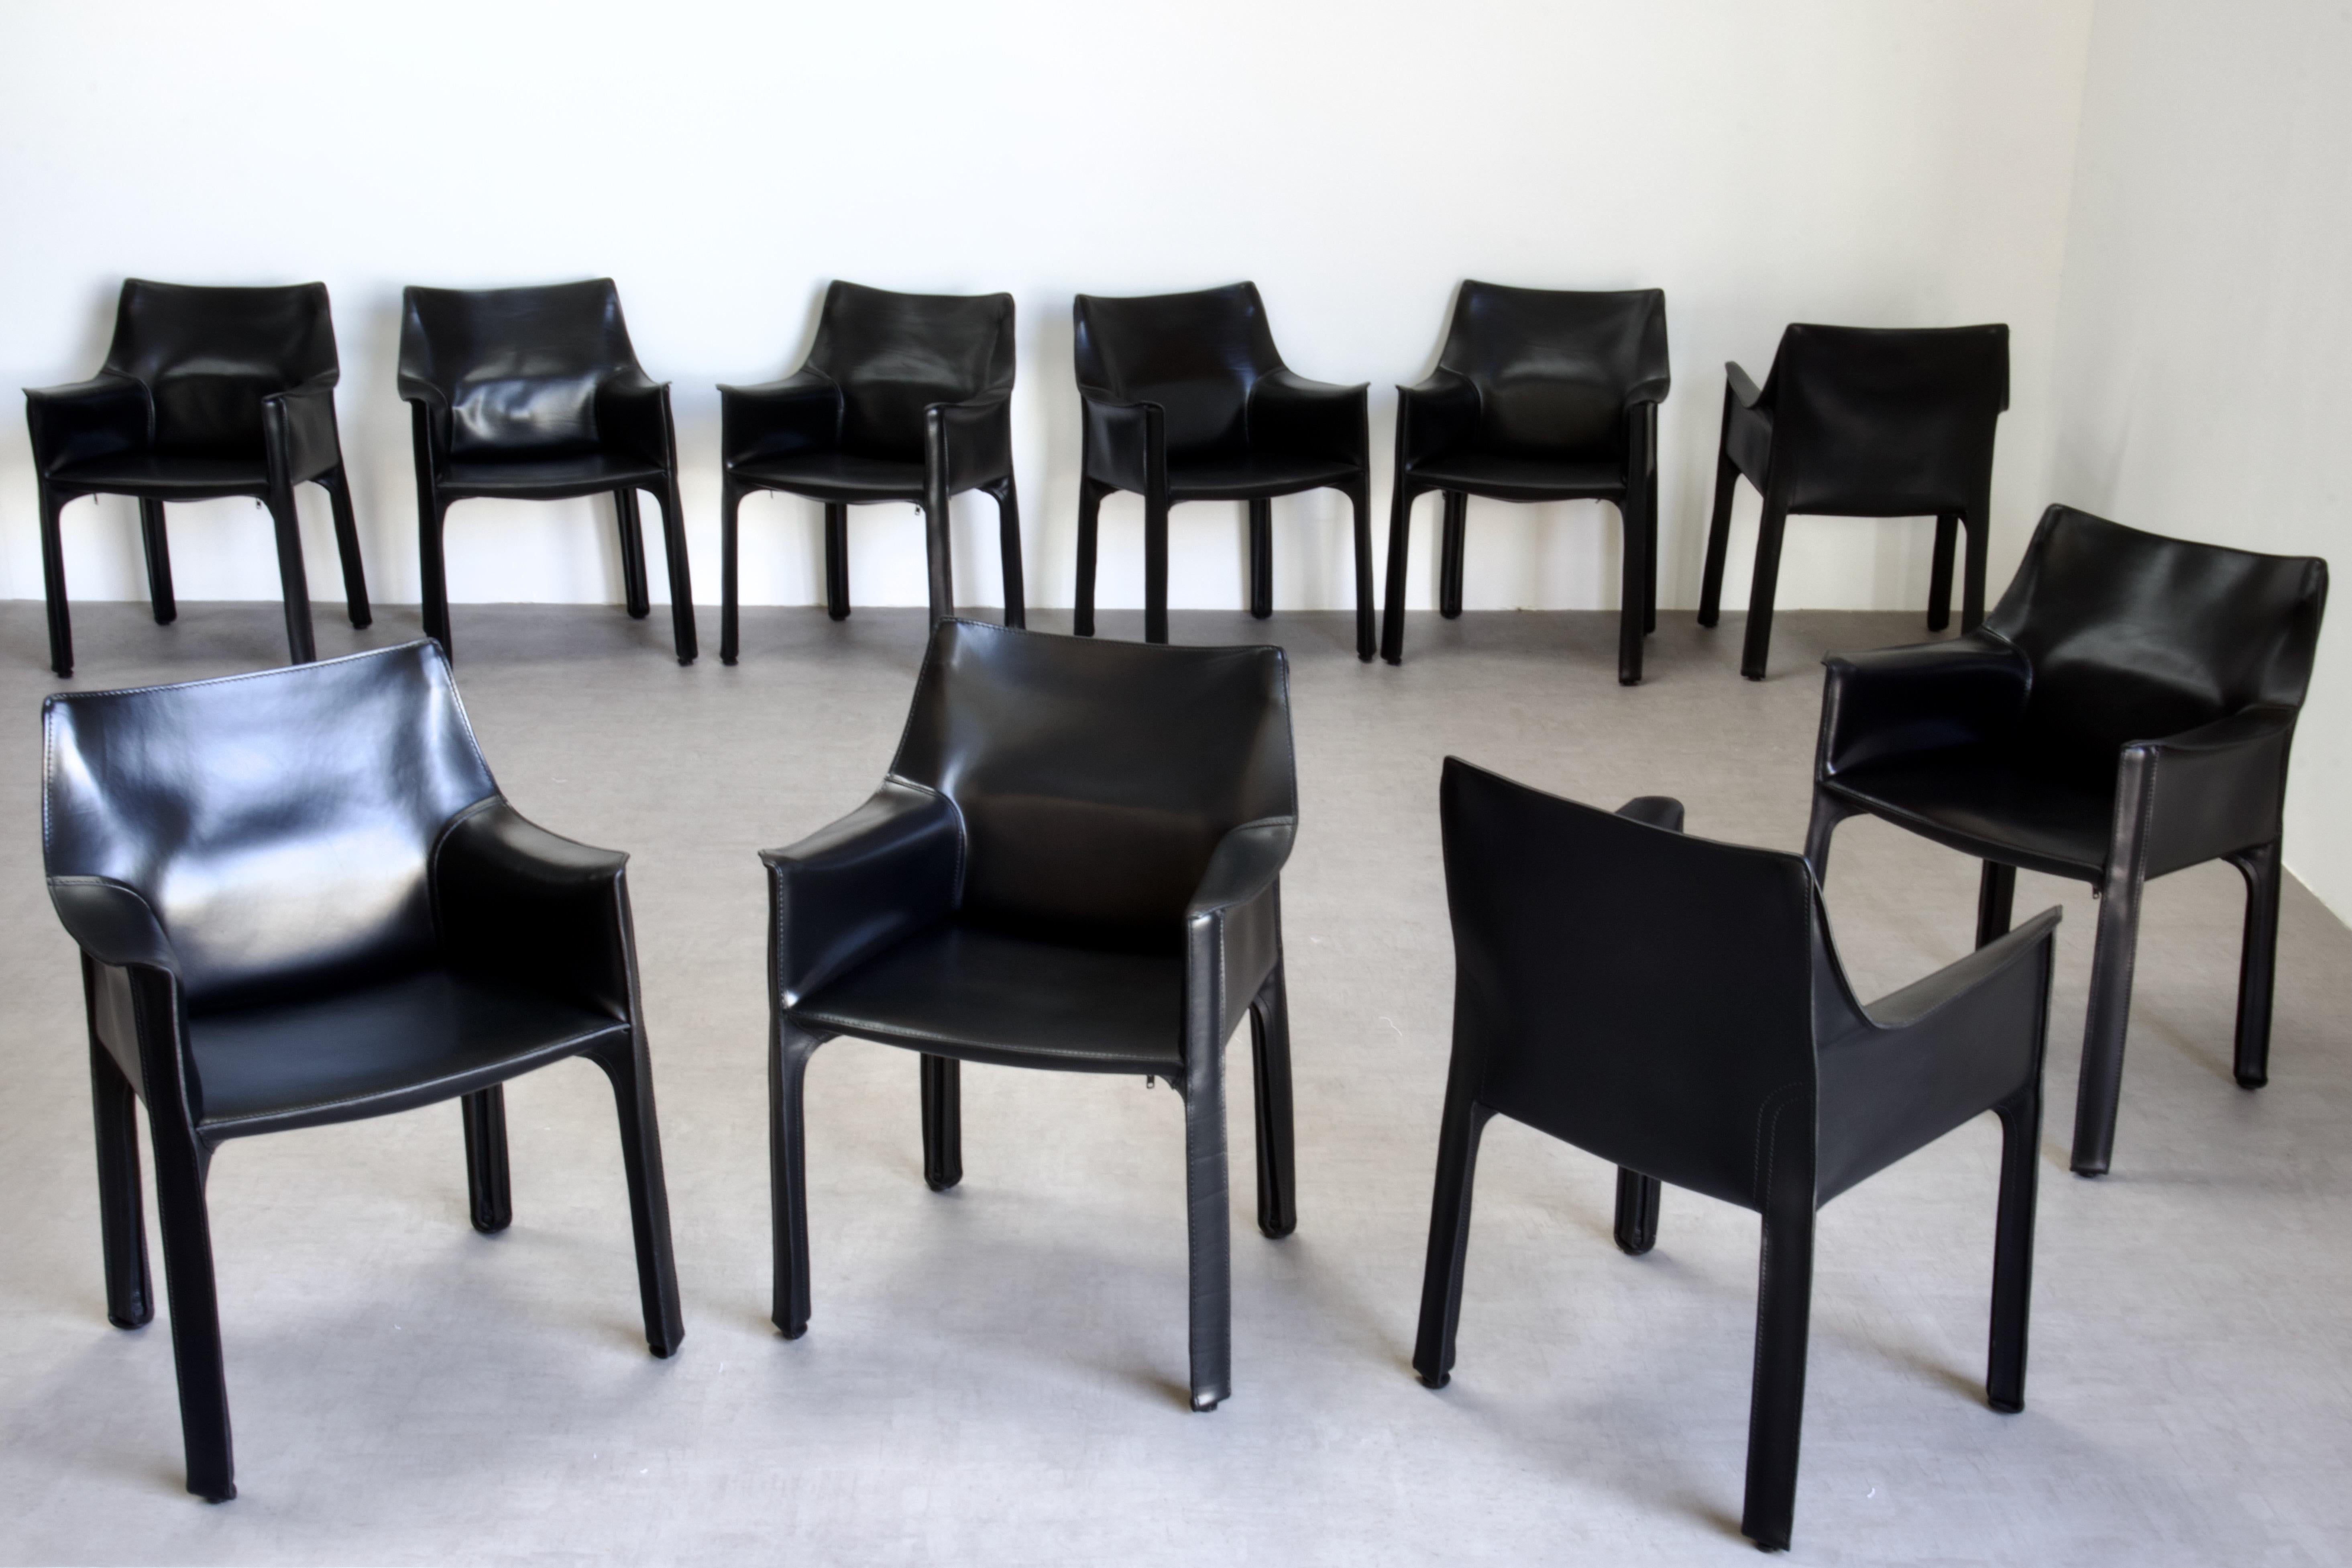 Set of 6 Mario Bellini CAB 413 chairs, made by Cassina. Flexible steel frame covered with a skin of high quality vintage black saddle leather. 

The chairs, which were already in very good condition, have been thoroughly refreshed by our atelier and